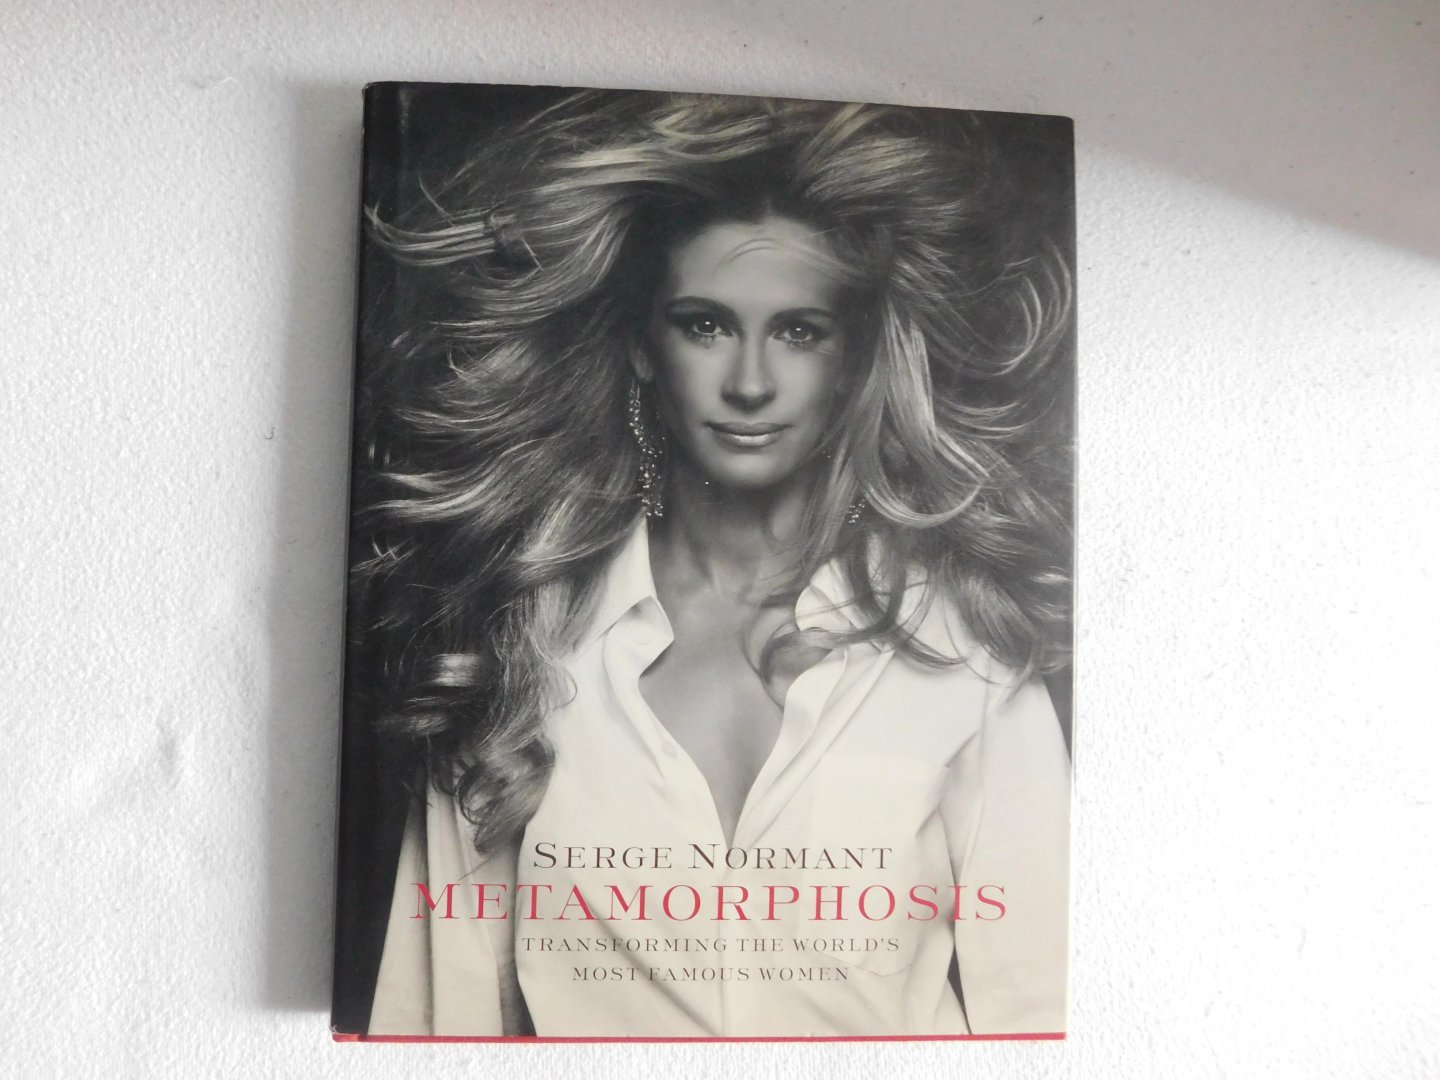 Normant - Metamorphosis: Transforming the World's Most Famous Women